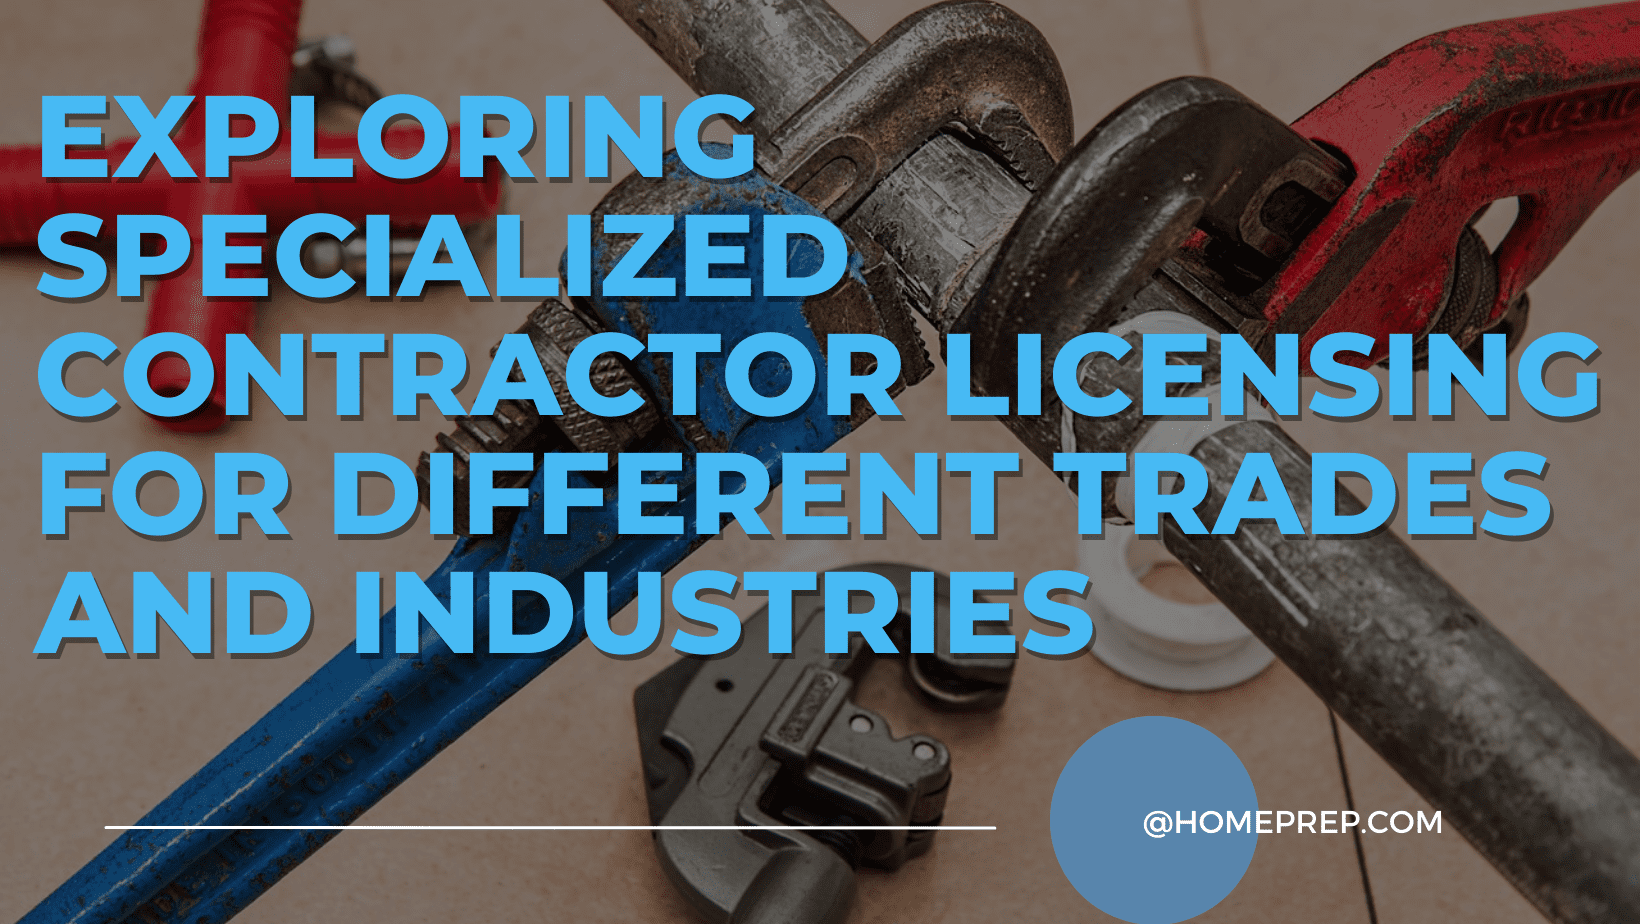 Exploring Specialized Contractor Licensing for Different Trades and Industries